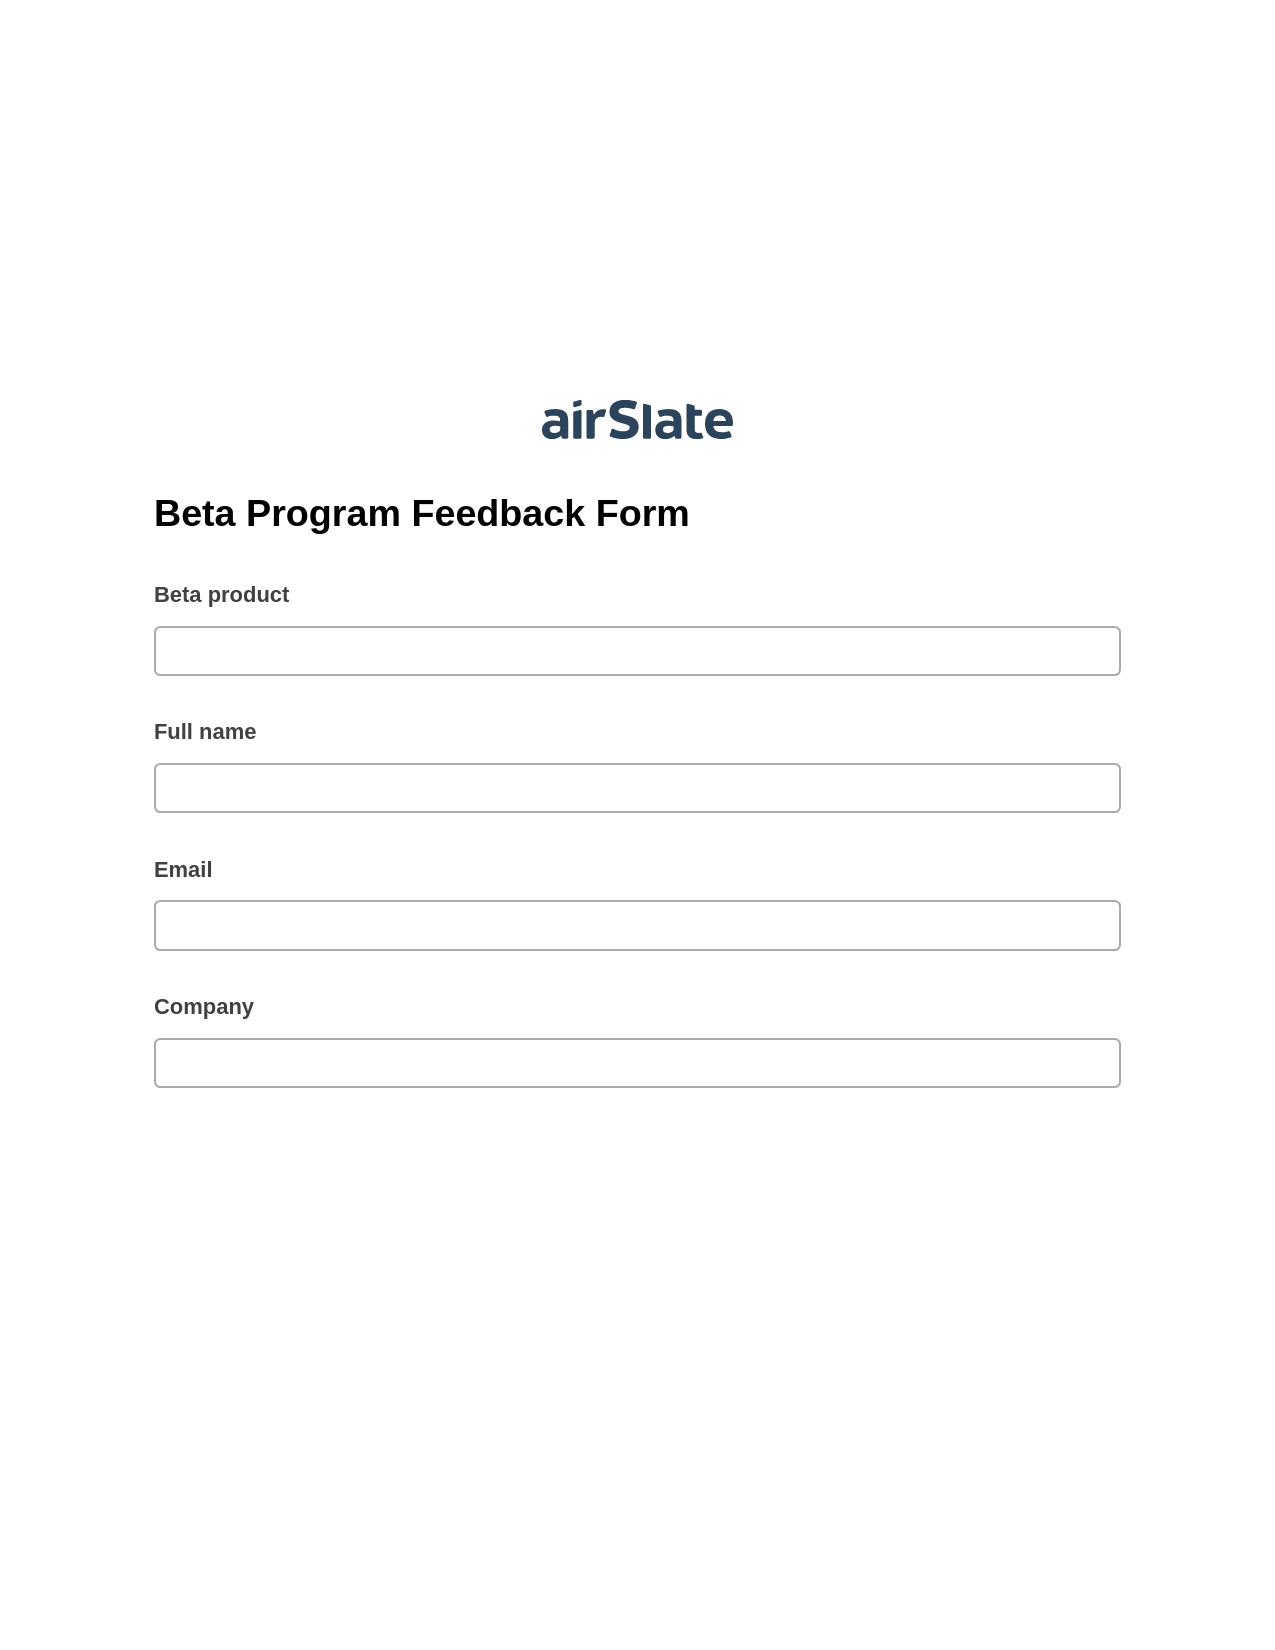 Multirole Beta Program Feedback Form Pre-fill Dropdowns from Excel Bot, Export to MS Dynamics 365 Bot, Post-finish Document Bot